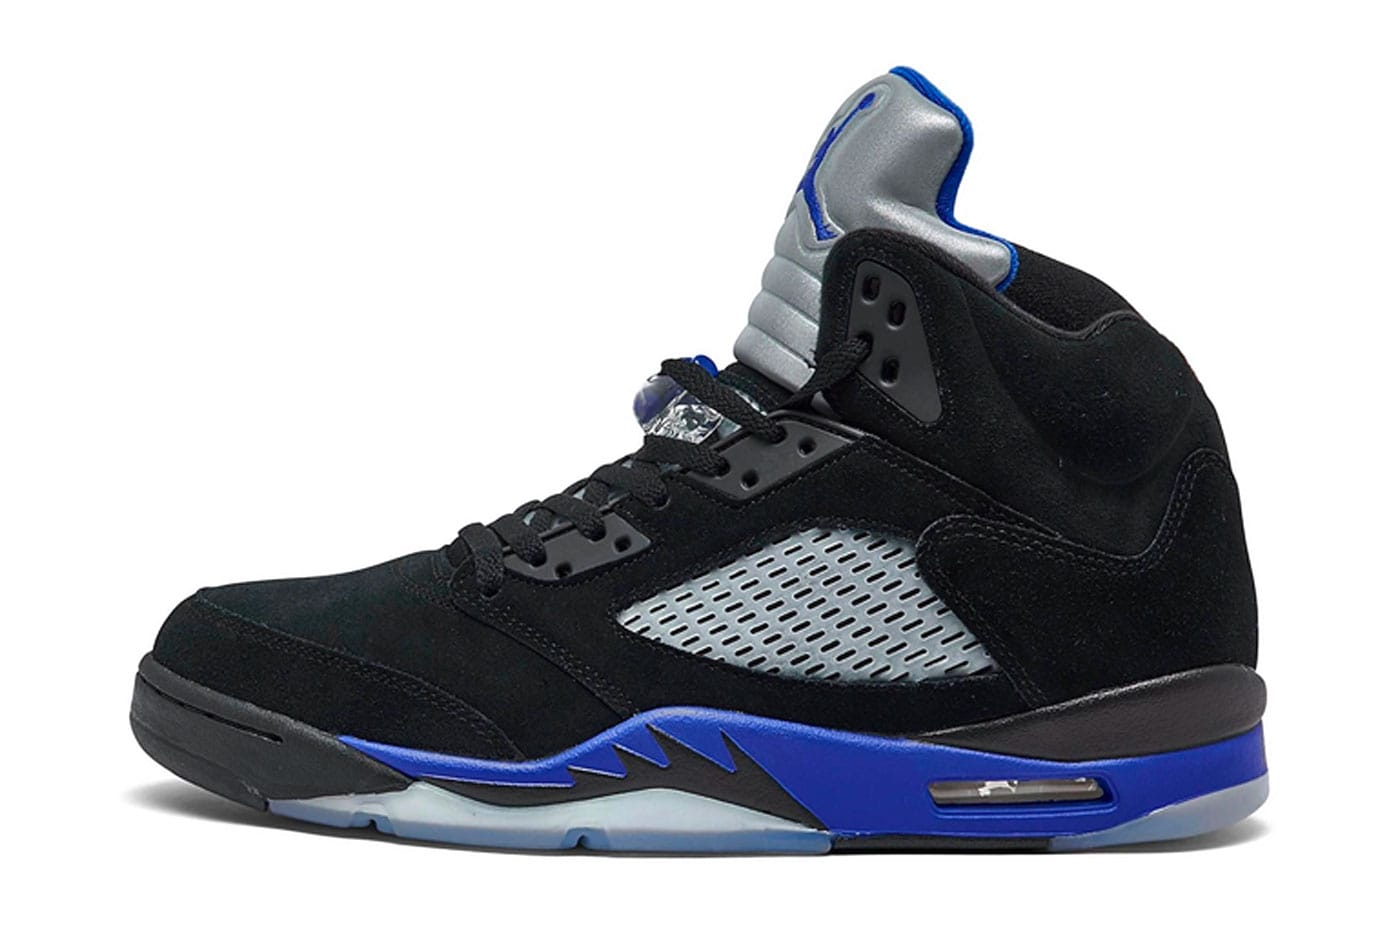 blue and black jordans that just came out